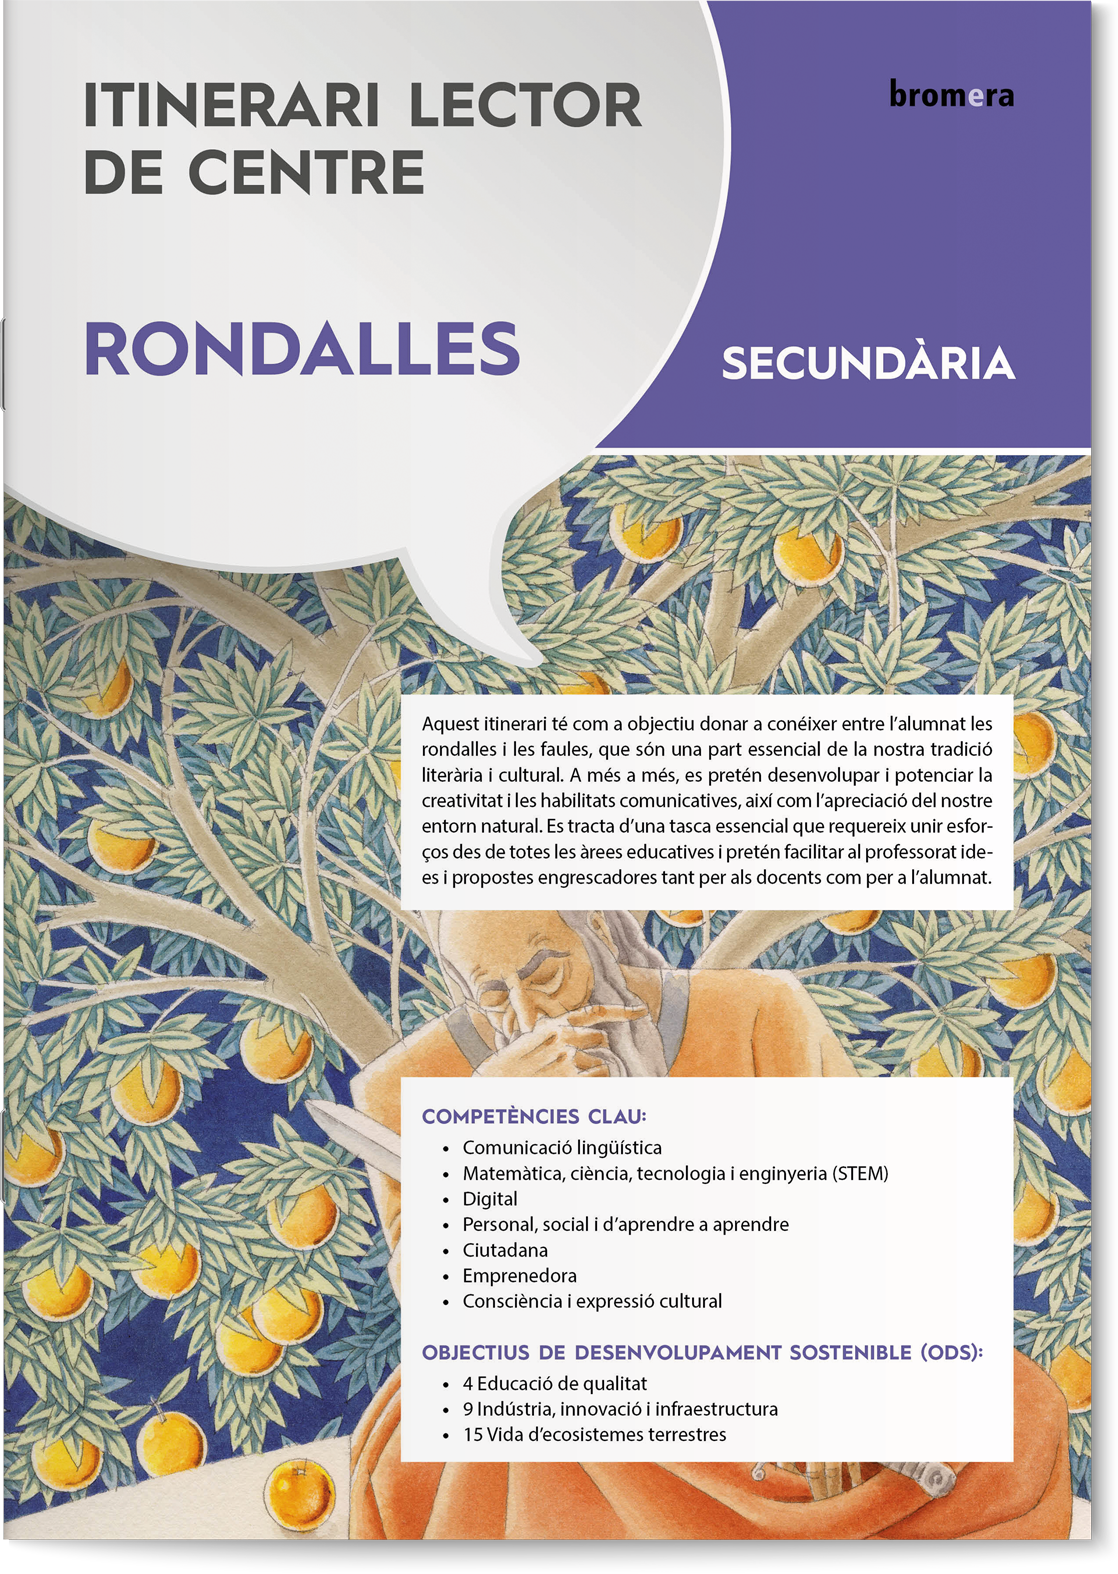 <p><strong>Rondalles</strong></p>